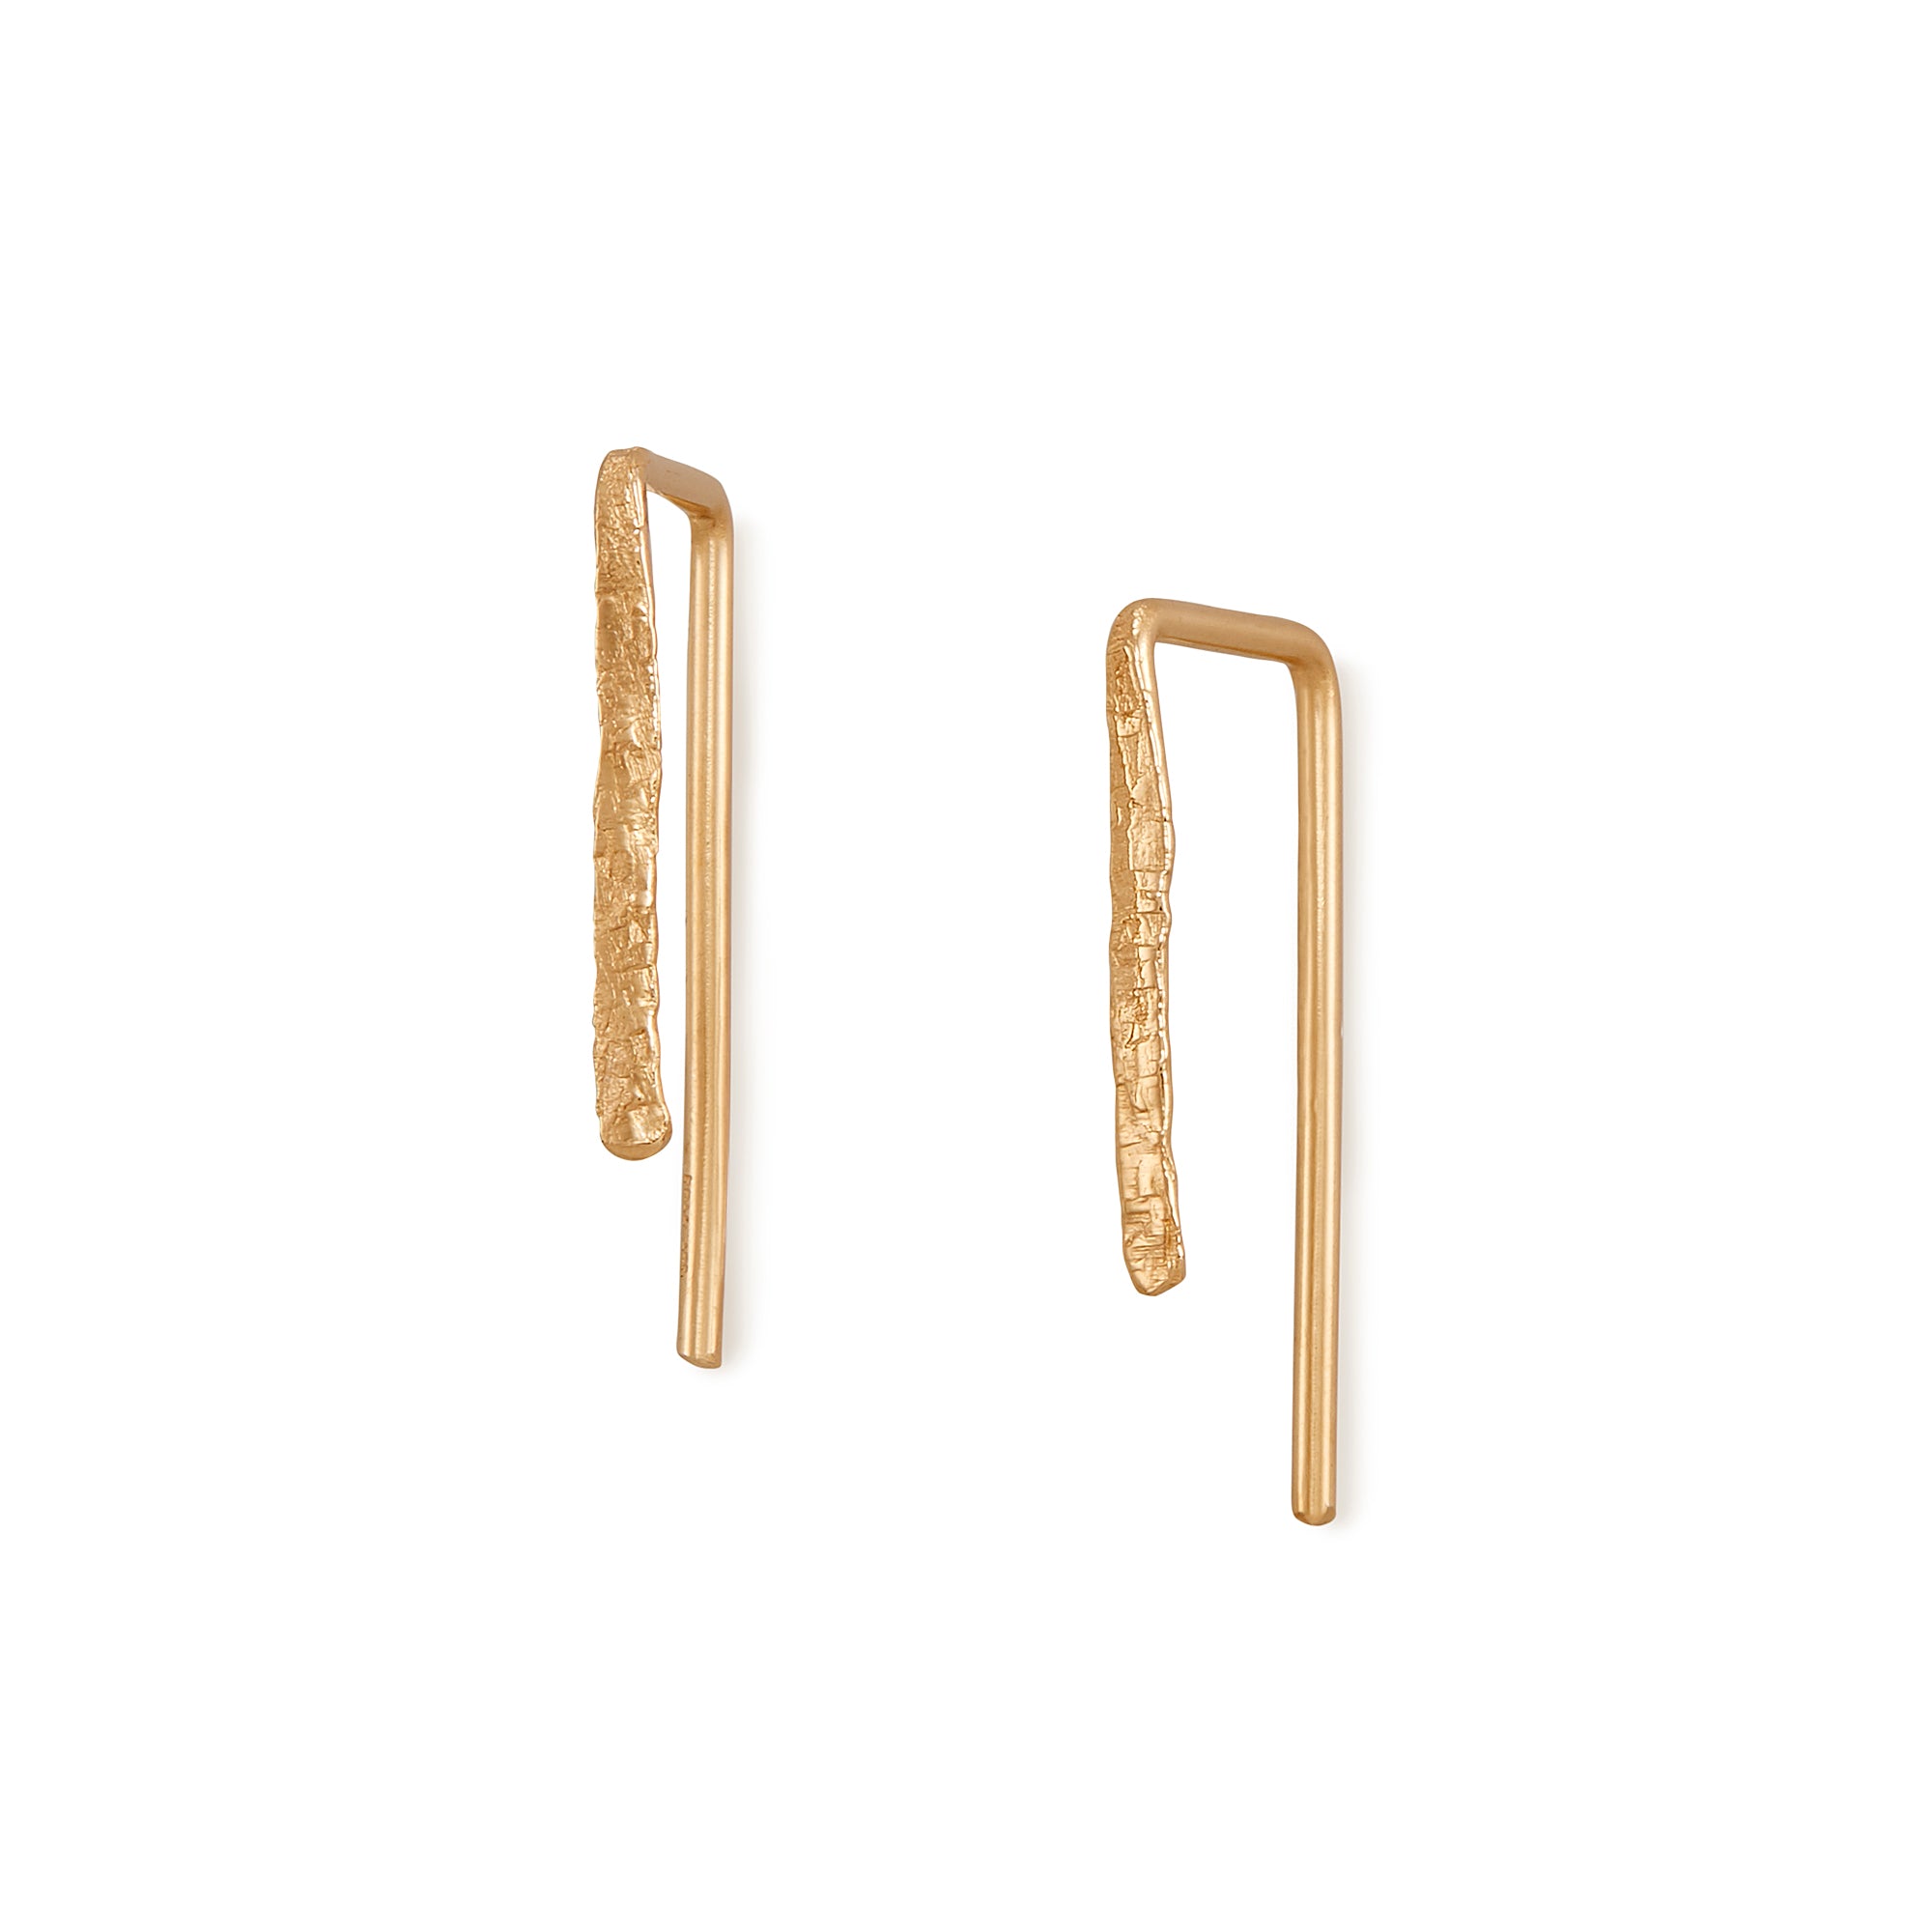 The Staple Hook, a modern threader earring in 14k gold with your choice of classic hammered textured or nugget texture